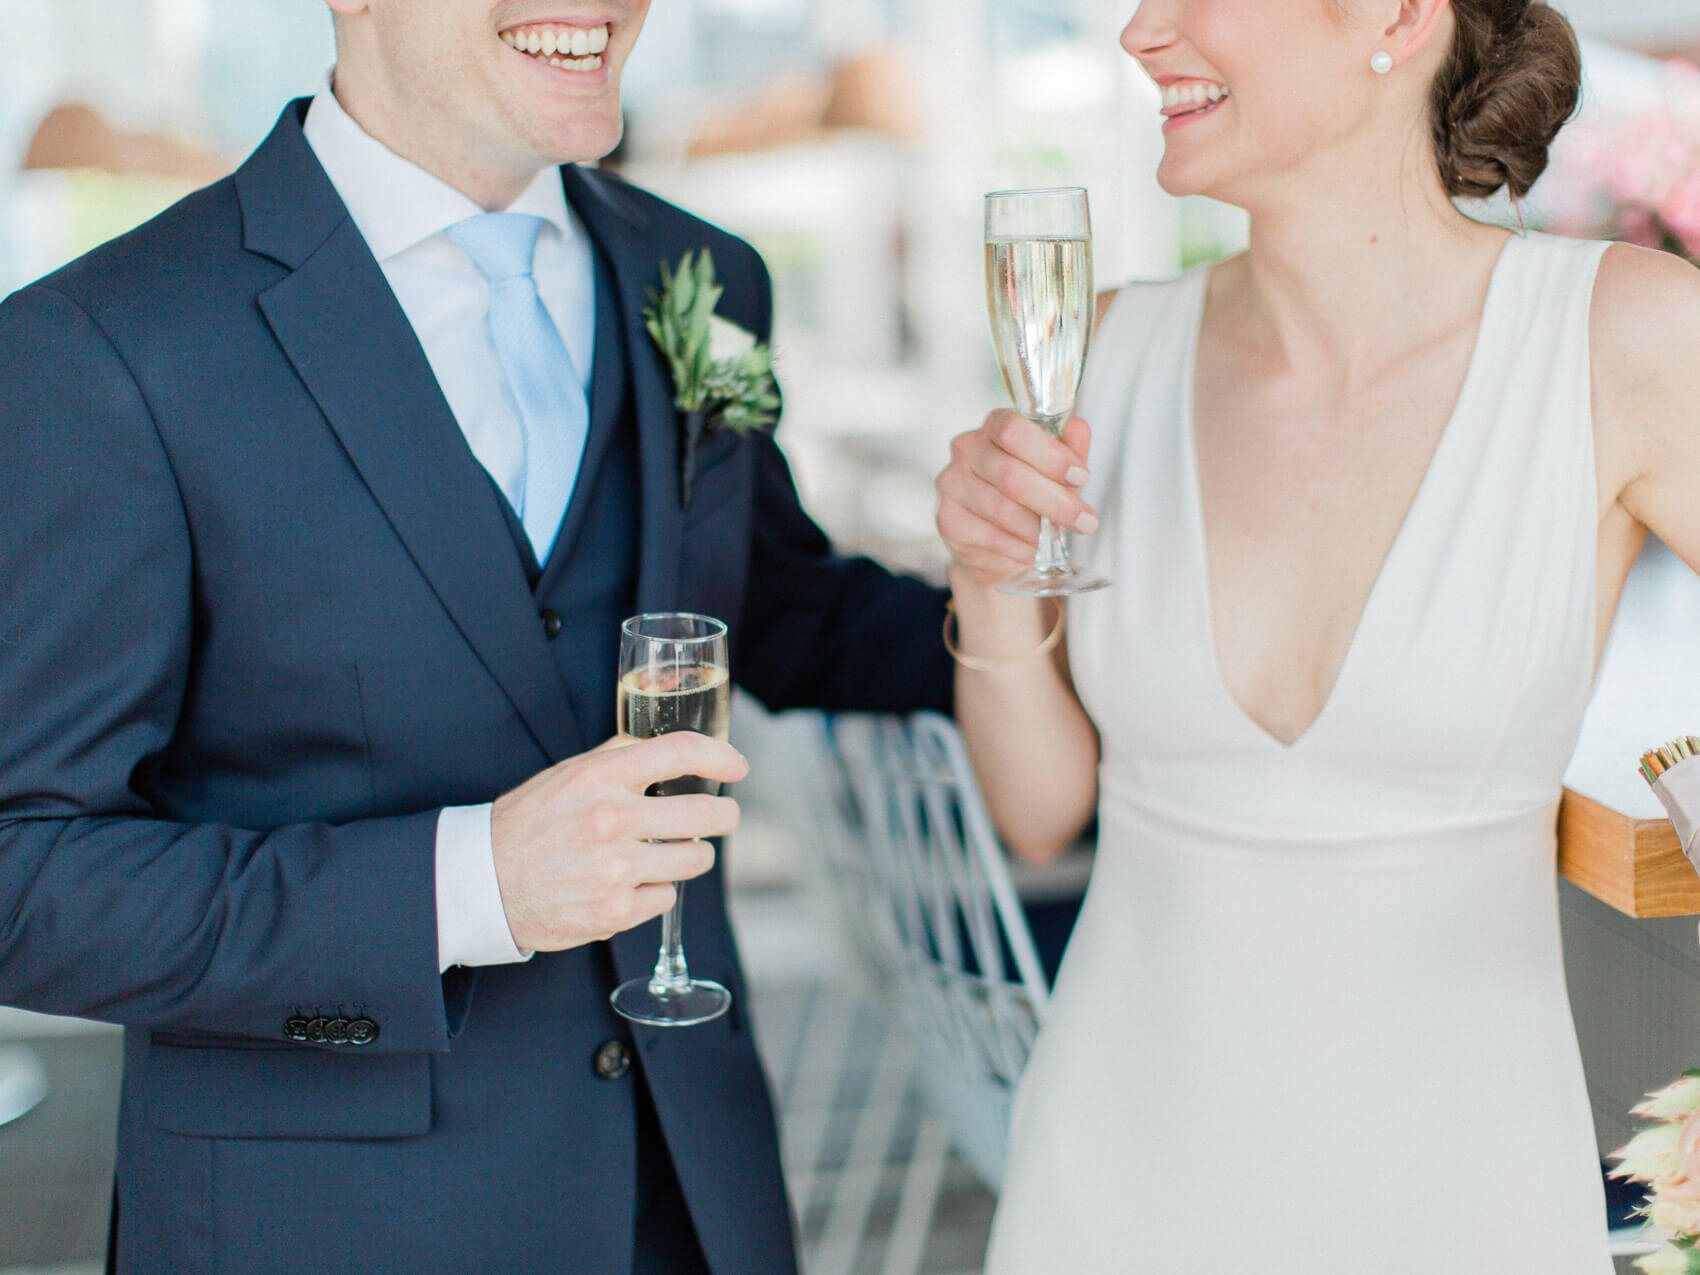 candid and natural posing of bride and groom on rooftop from an intimate downtown toronto wedding at terroni restaurant